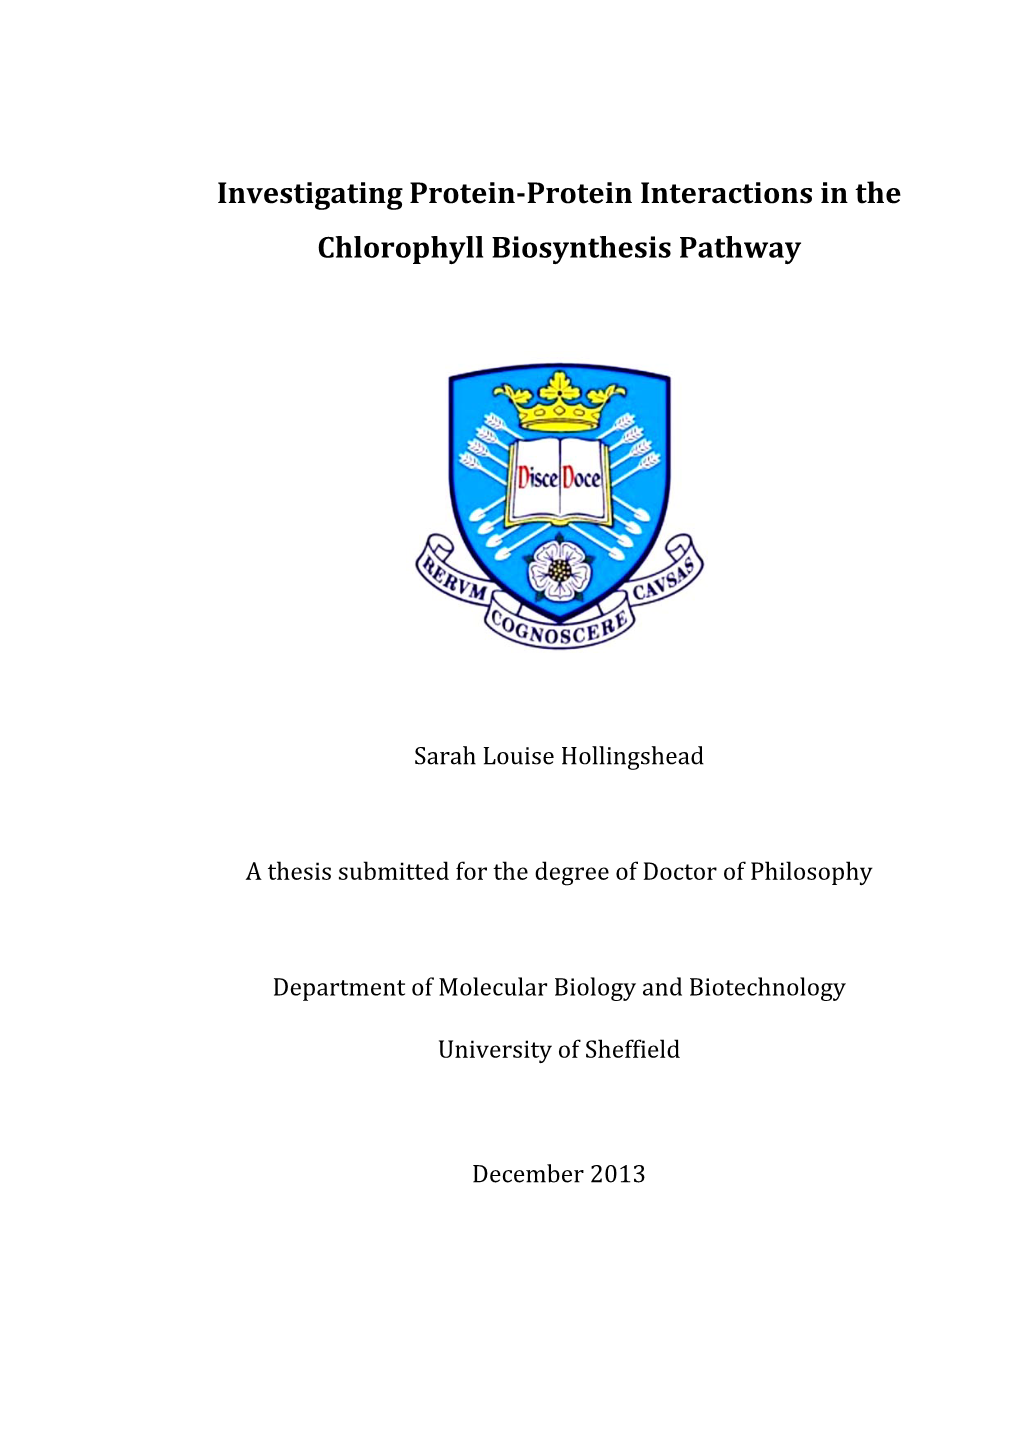 Investigating Protein-Protein Interactions in the Chlorophyll Biosynthesis Pathway